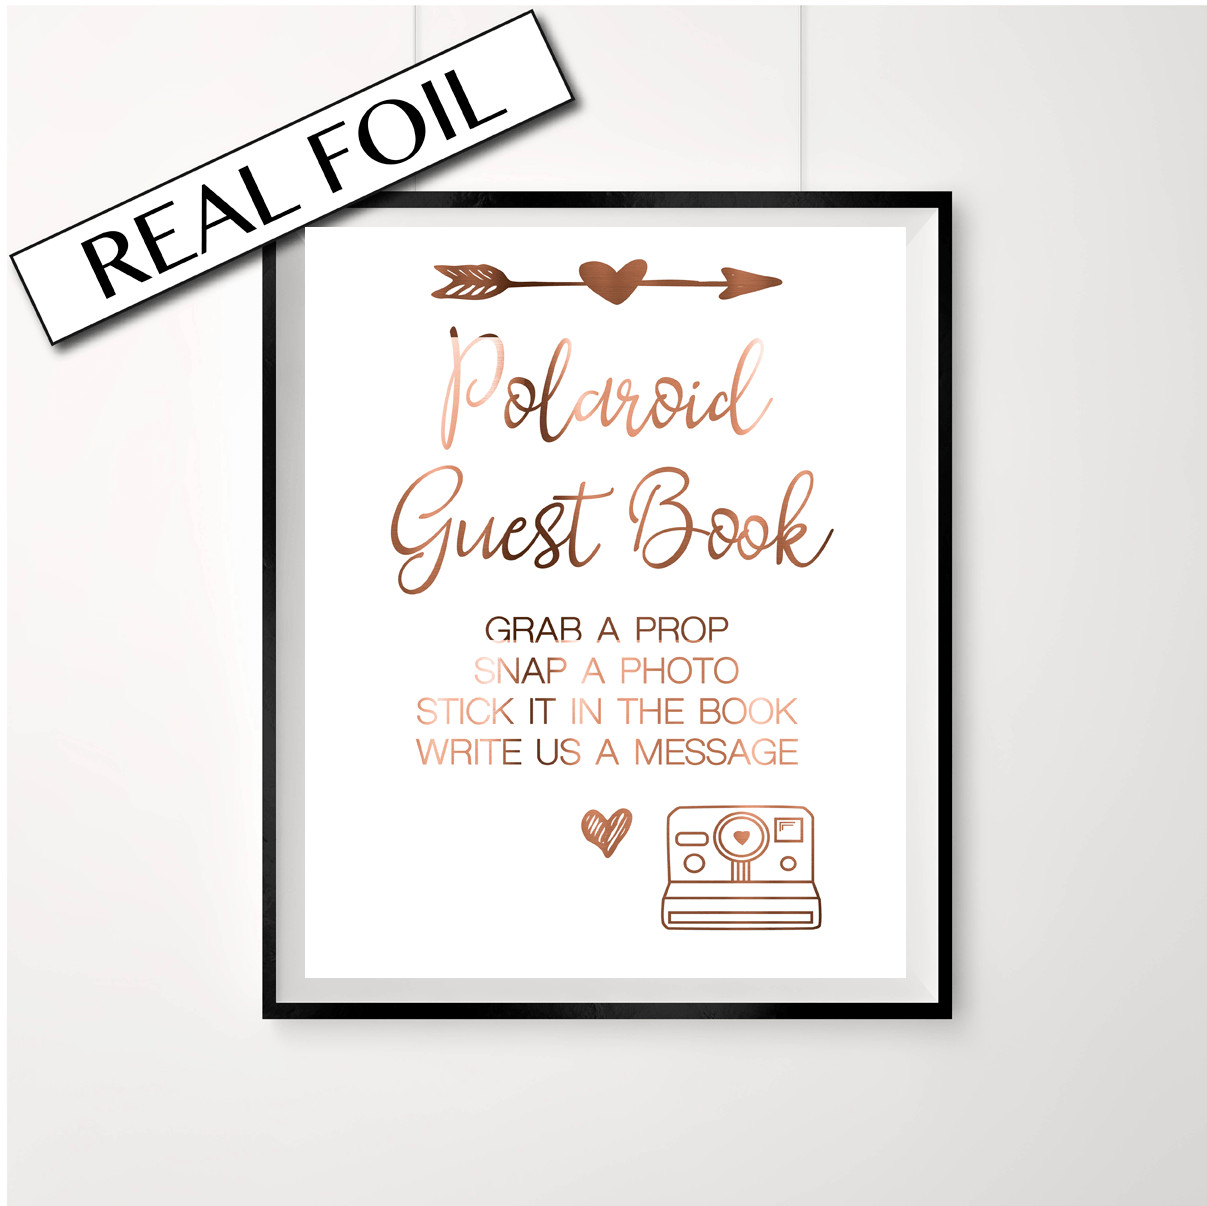 Engagement Party Sign In Book Ideas
 Copper Engagement Wedding Party Sign Polaroid Guest Book